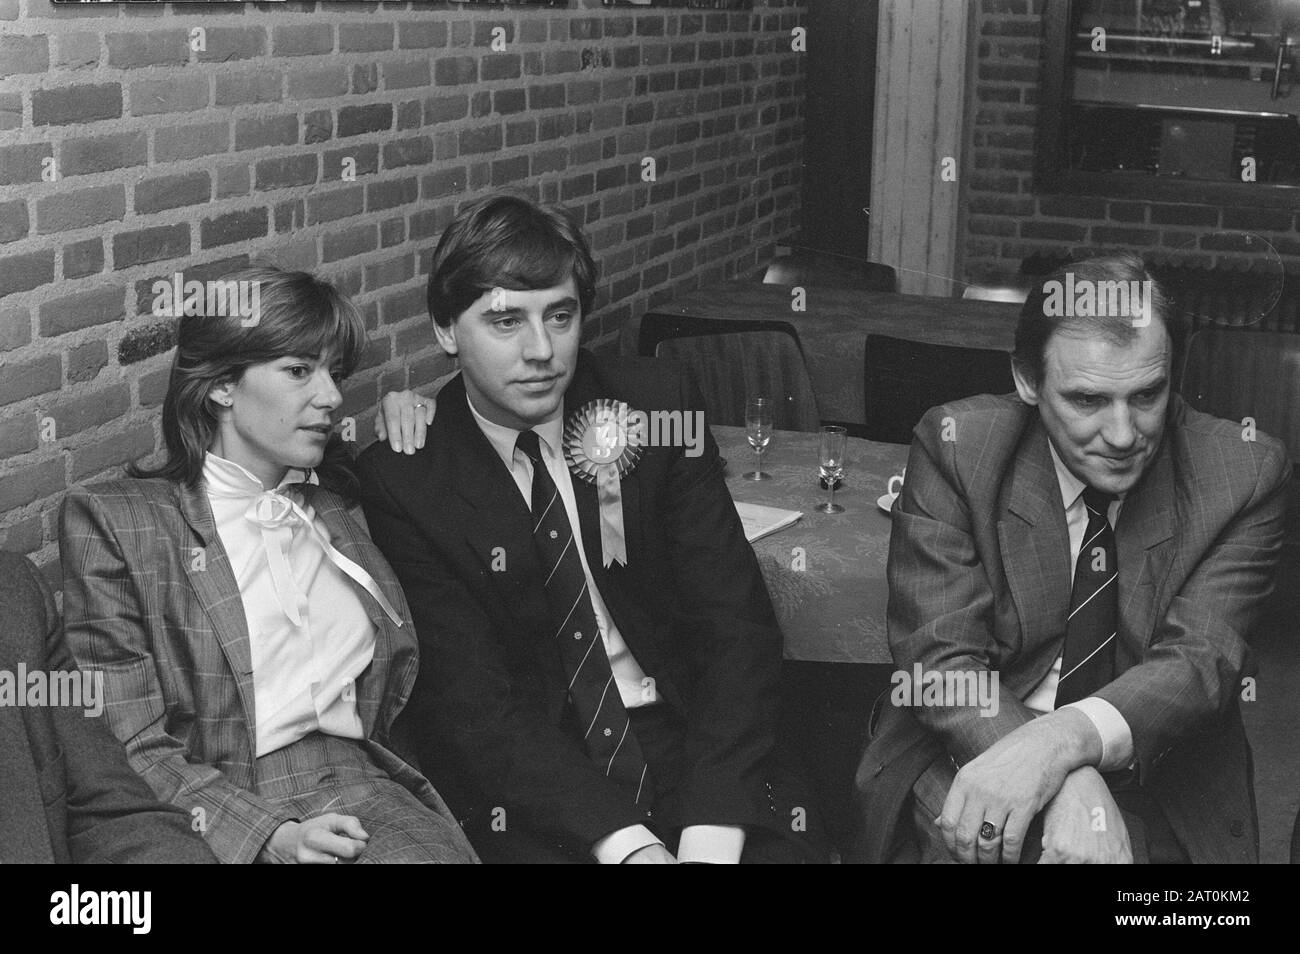 Municipal elections 1986  VVD leader Nijpels and his wife look printed at the results (Amersfoort) Date: 19 March 1986 Location: Amersfoort Keywords: municipal councils, parliamentarians, elections , Women's Personal Name: Nijpels, Ed Stock Photo